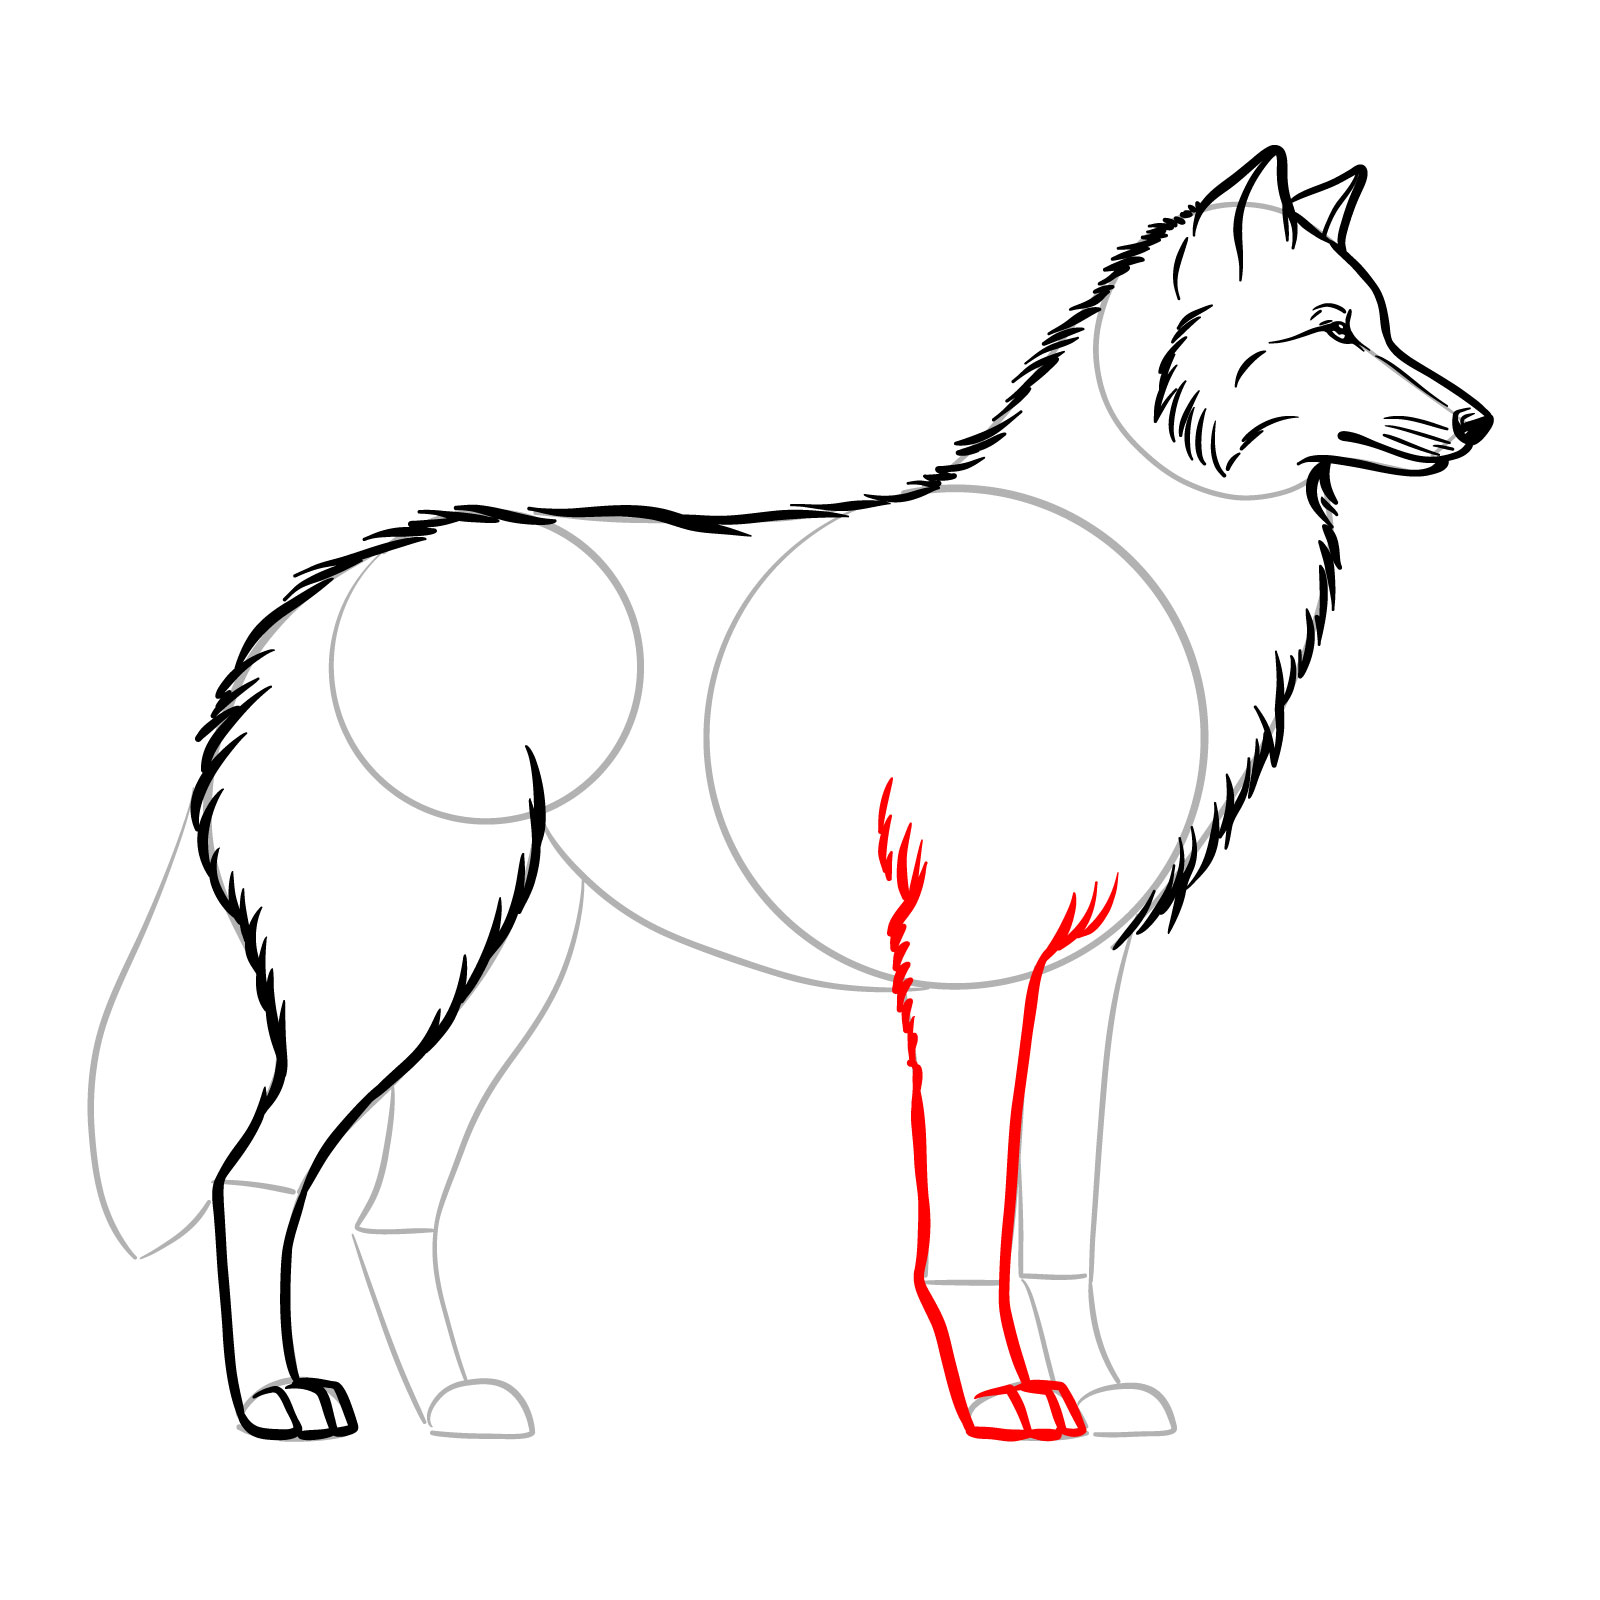 Drawing the front leg of a wolf in a side view sketch - step 10